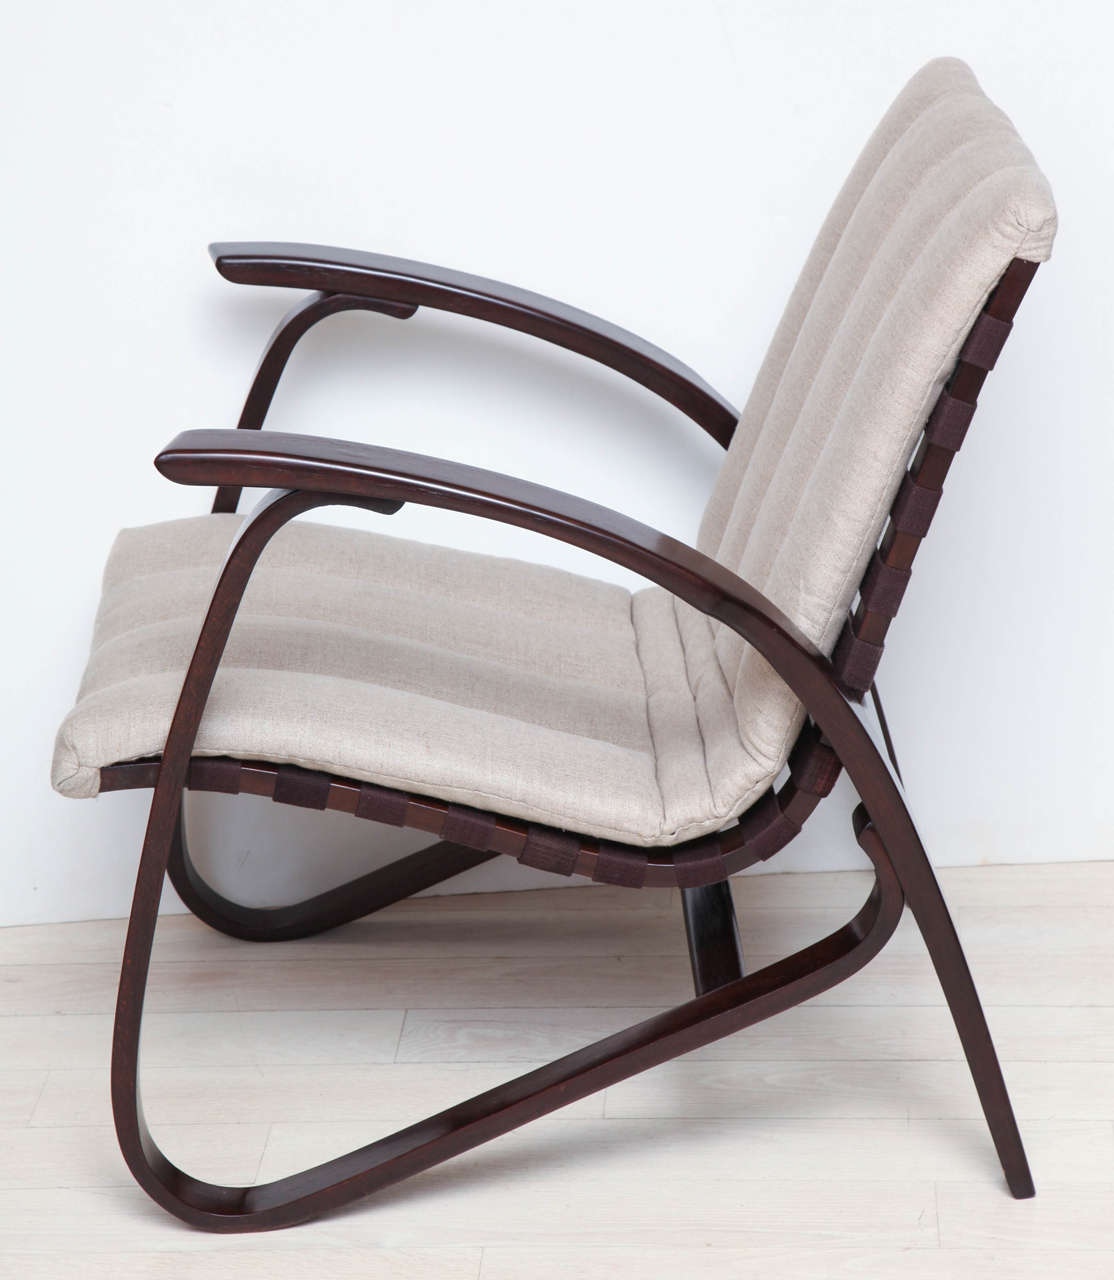 Czech Pair of Exceptional Bentwood and Canvas Armchairs by Jan Vanek